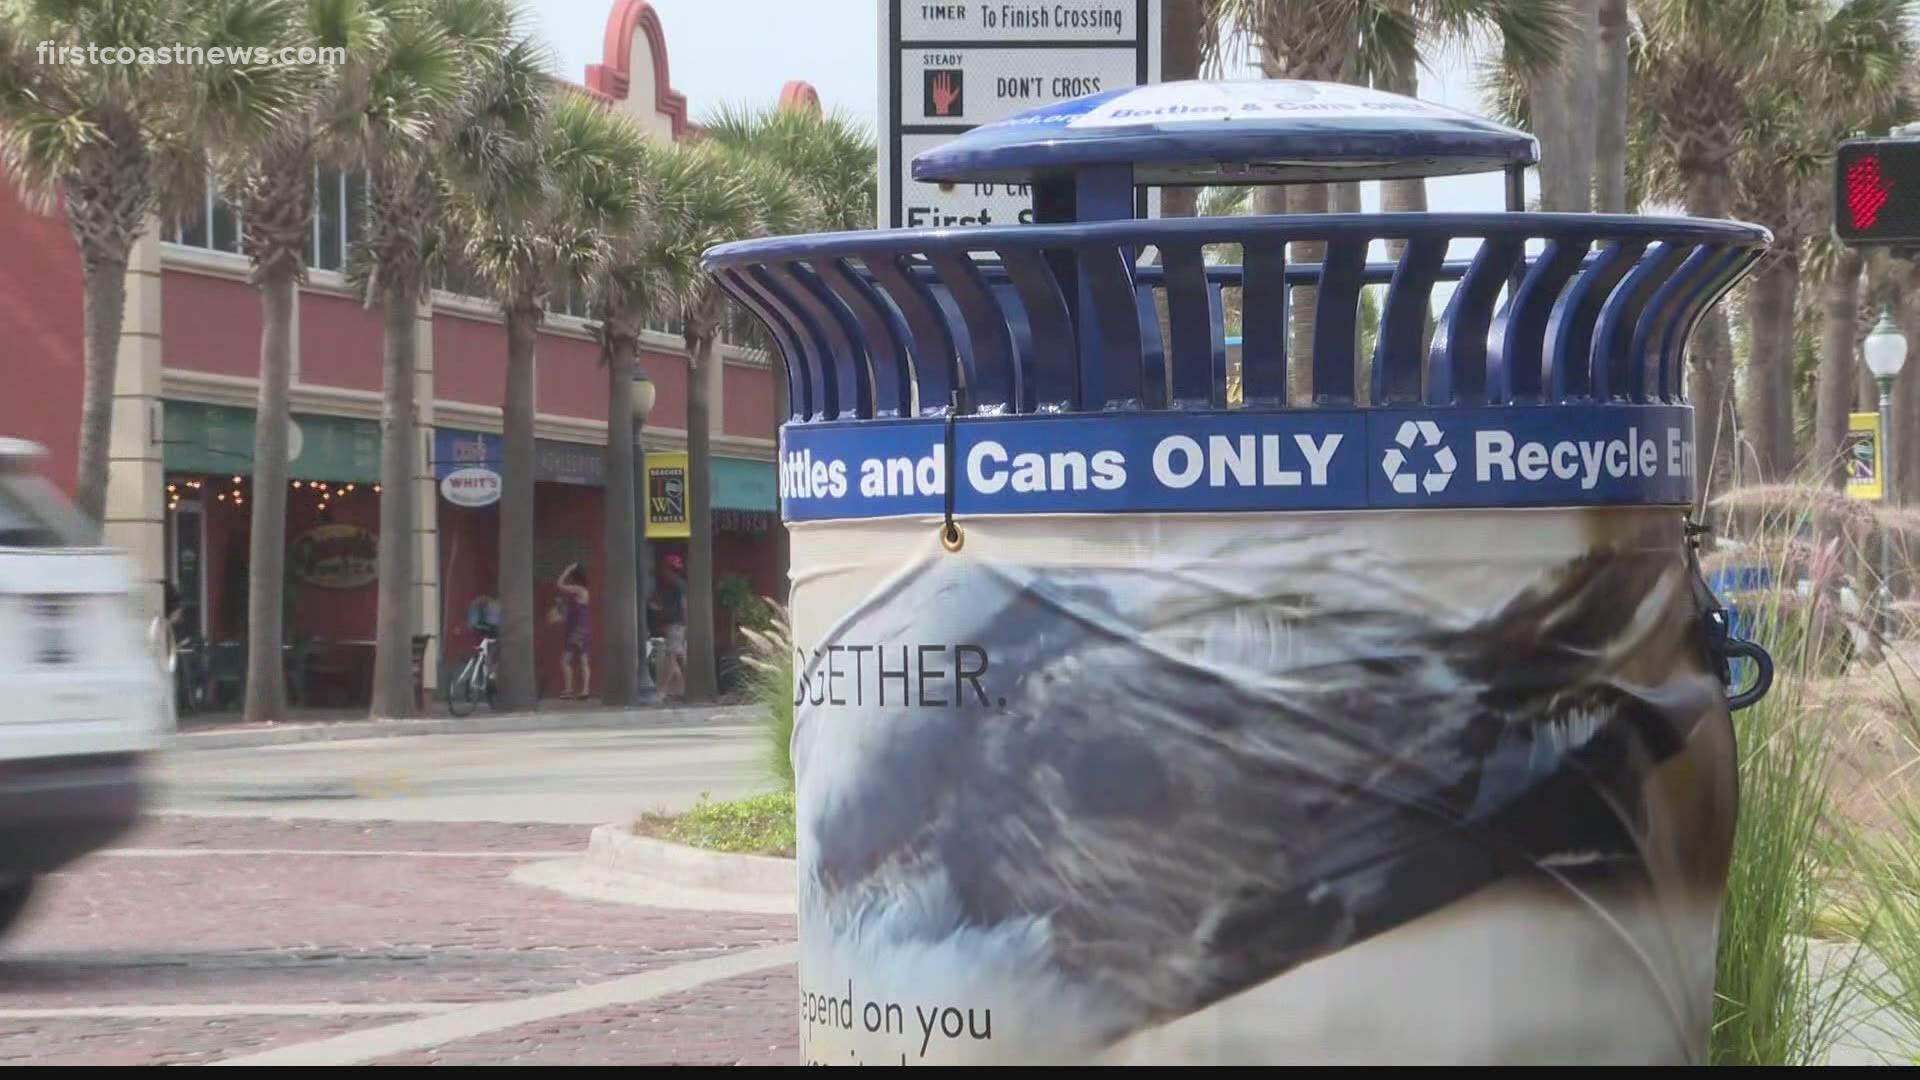 Beaches Go Green gives new smart recycling bins to Atlantic, Neptune Beaches